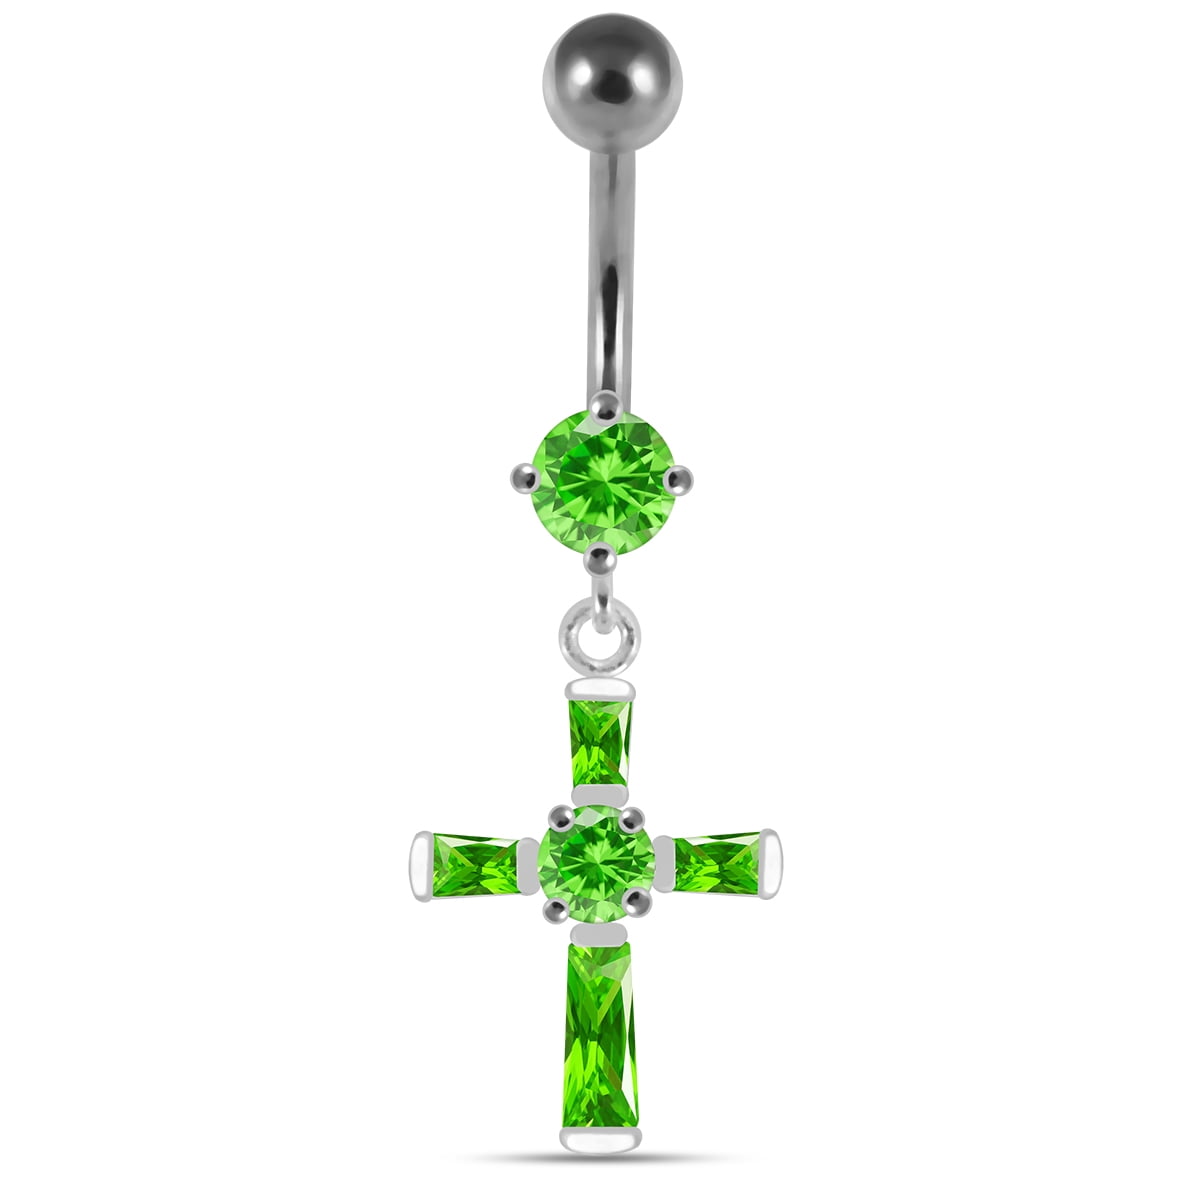 Jeweled Fancy Cross with Heart Gem Dangling 925 Sterling Silver Belly-Navel Ring Body Jewelry 